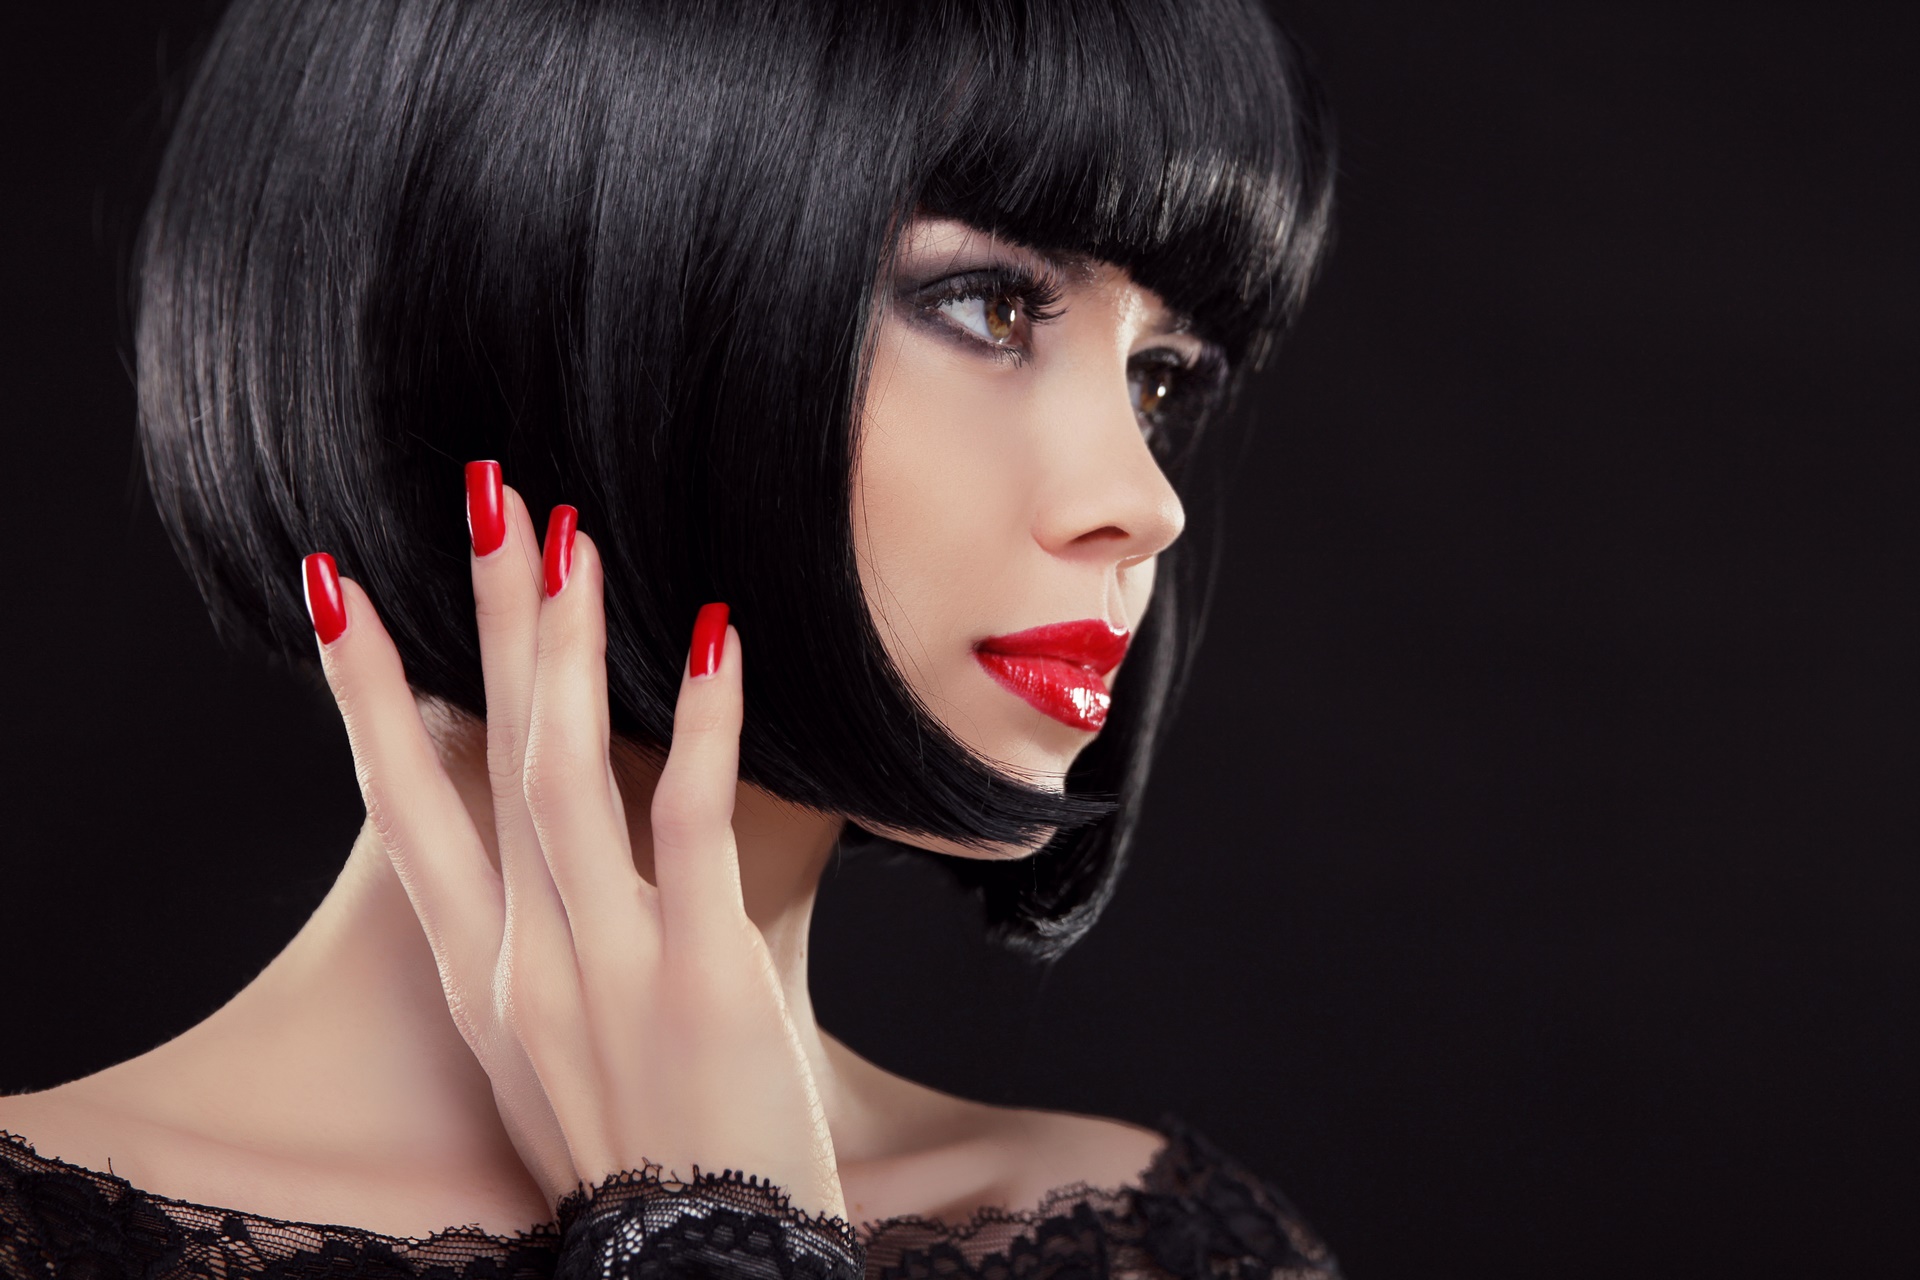 Bob short black hairstyle. Manicured nails and red lips. Fashion